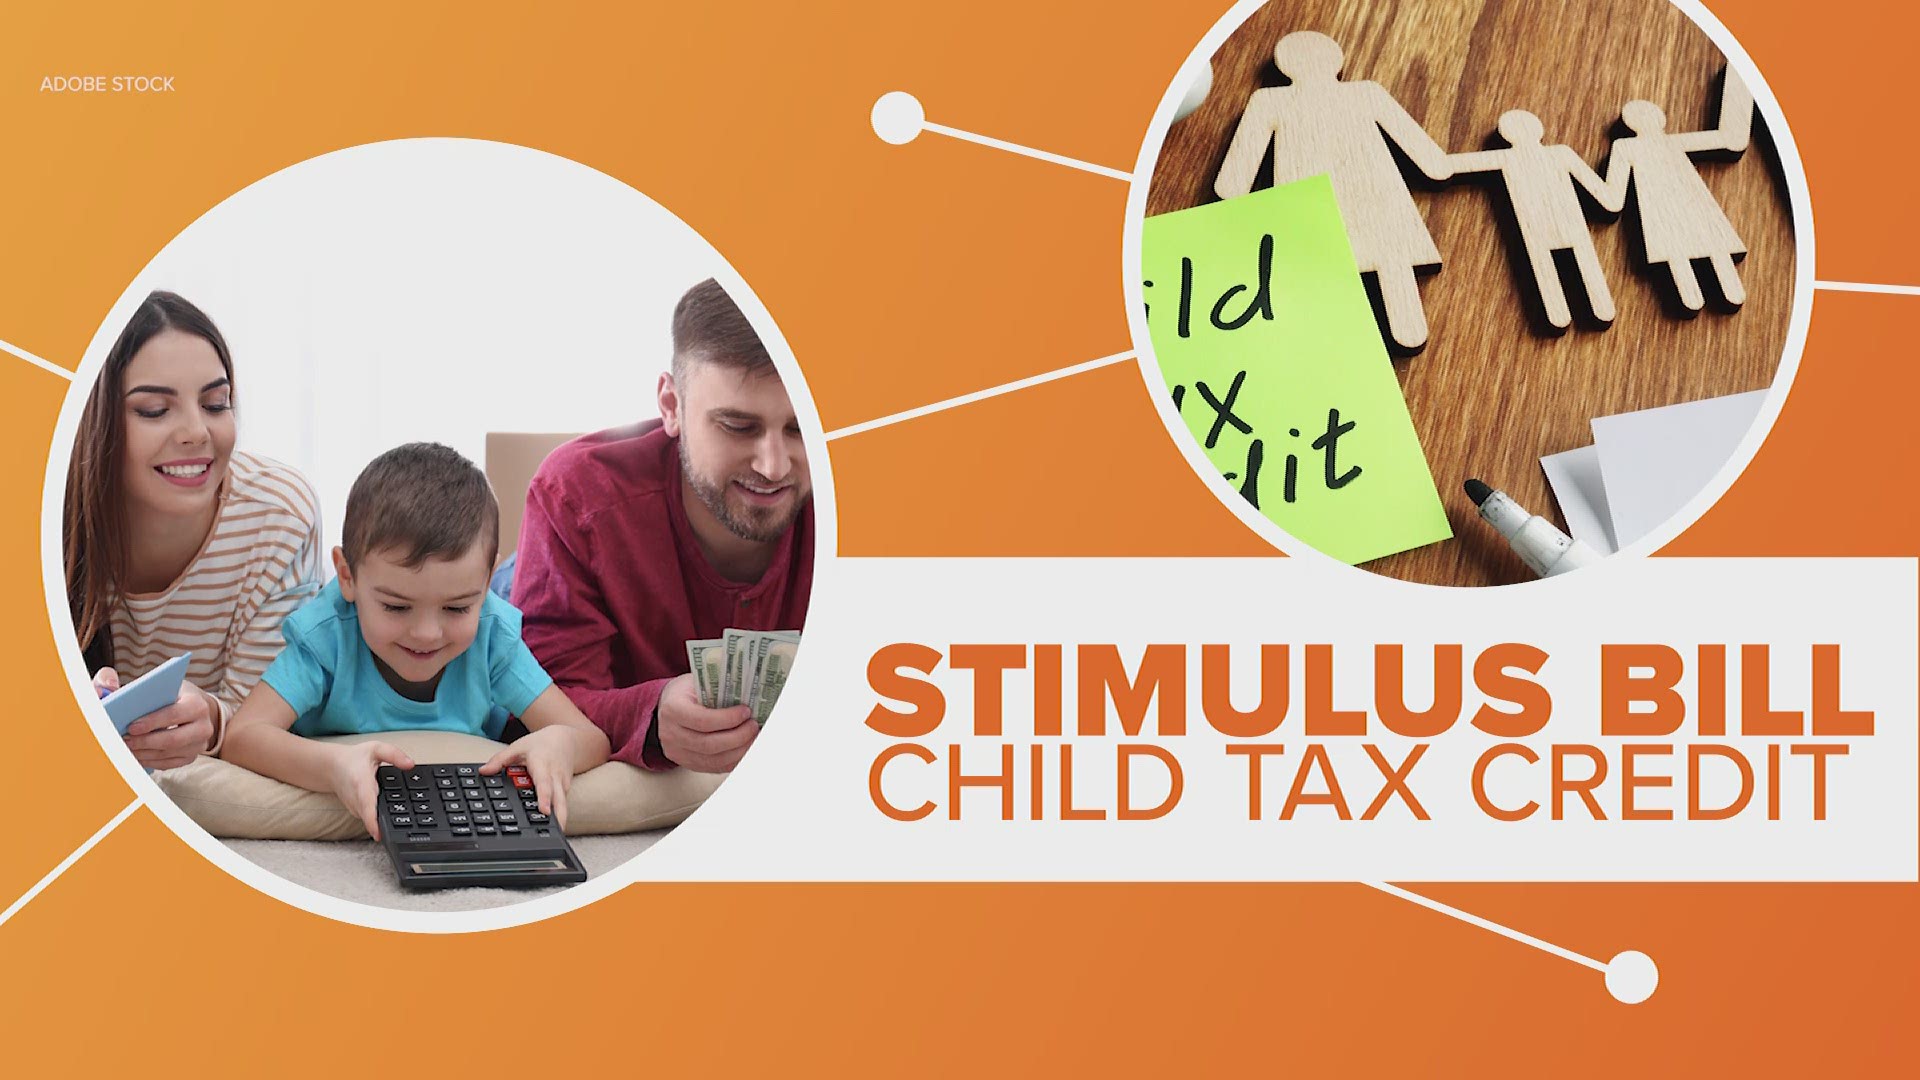 Families with children could be getting thousands of dollars thanks to the massive stimulus bill passed in March. But how will the child tax credit work?